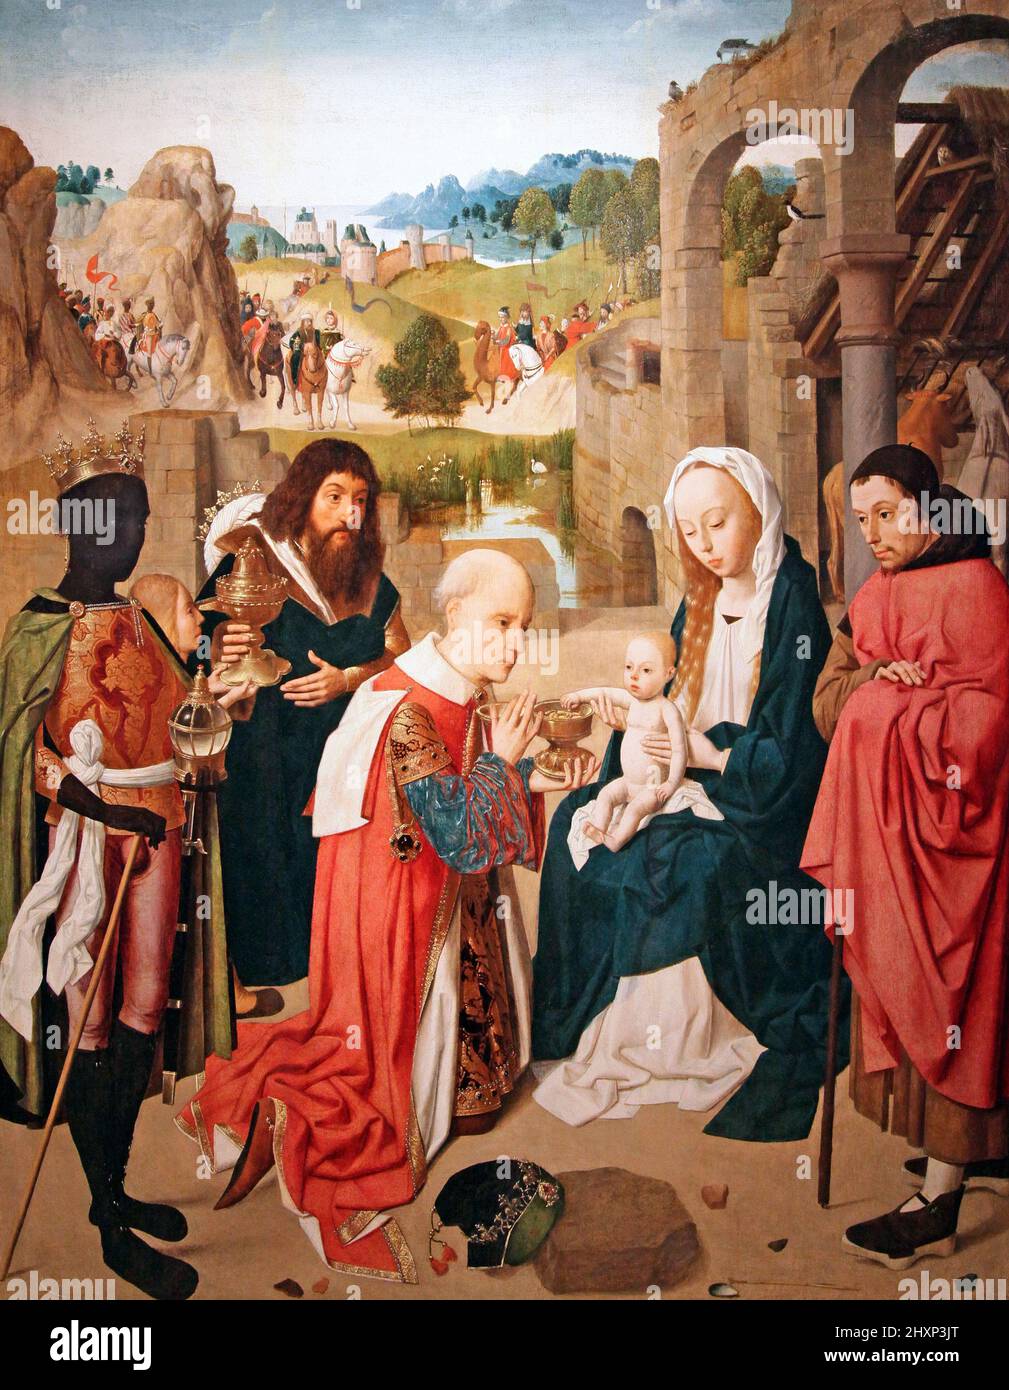 The Adoration of the Magi by Geertgen tot Sint Jans (c.1455-1495?).Early Netherlandish painter.The three magi  are paying tribute to the newborn baby Jesus Stock Photo